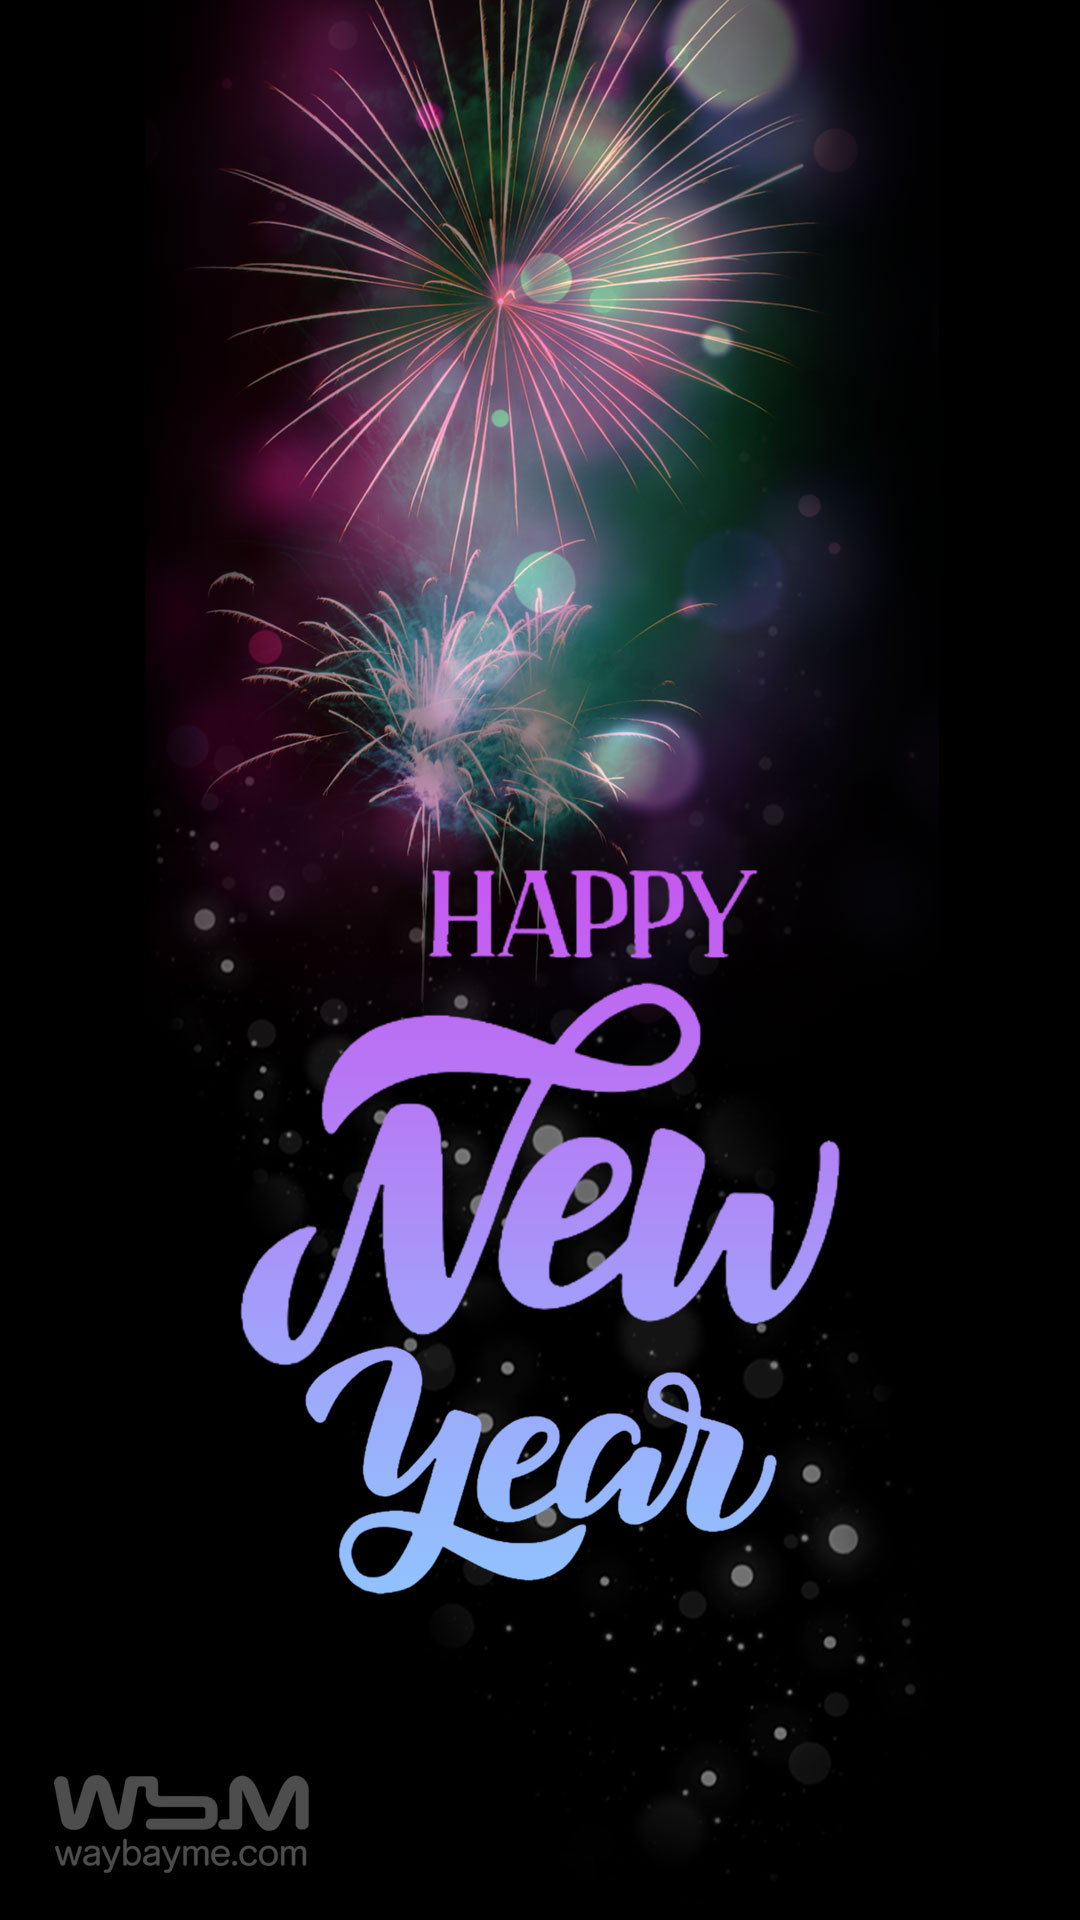 Happy New Year Wishes, happy new year song, happy new year songs, happy new year wishes, happy new year greetings, New Year Wishes, New Year Greetings, New Year Card, New Year Quotes, New Year Messages, Free New Year Cards, Free New Year Greeting Cards, free New Year Gift, Free New Year Gifts, New Year Offers